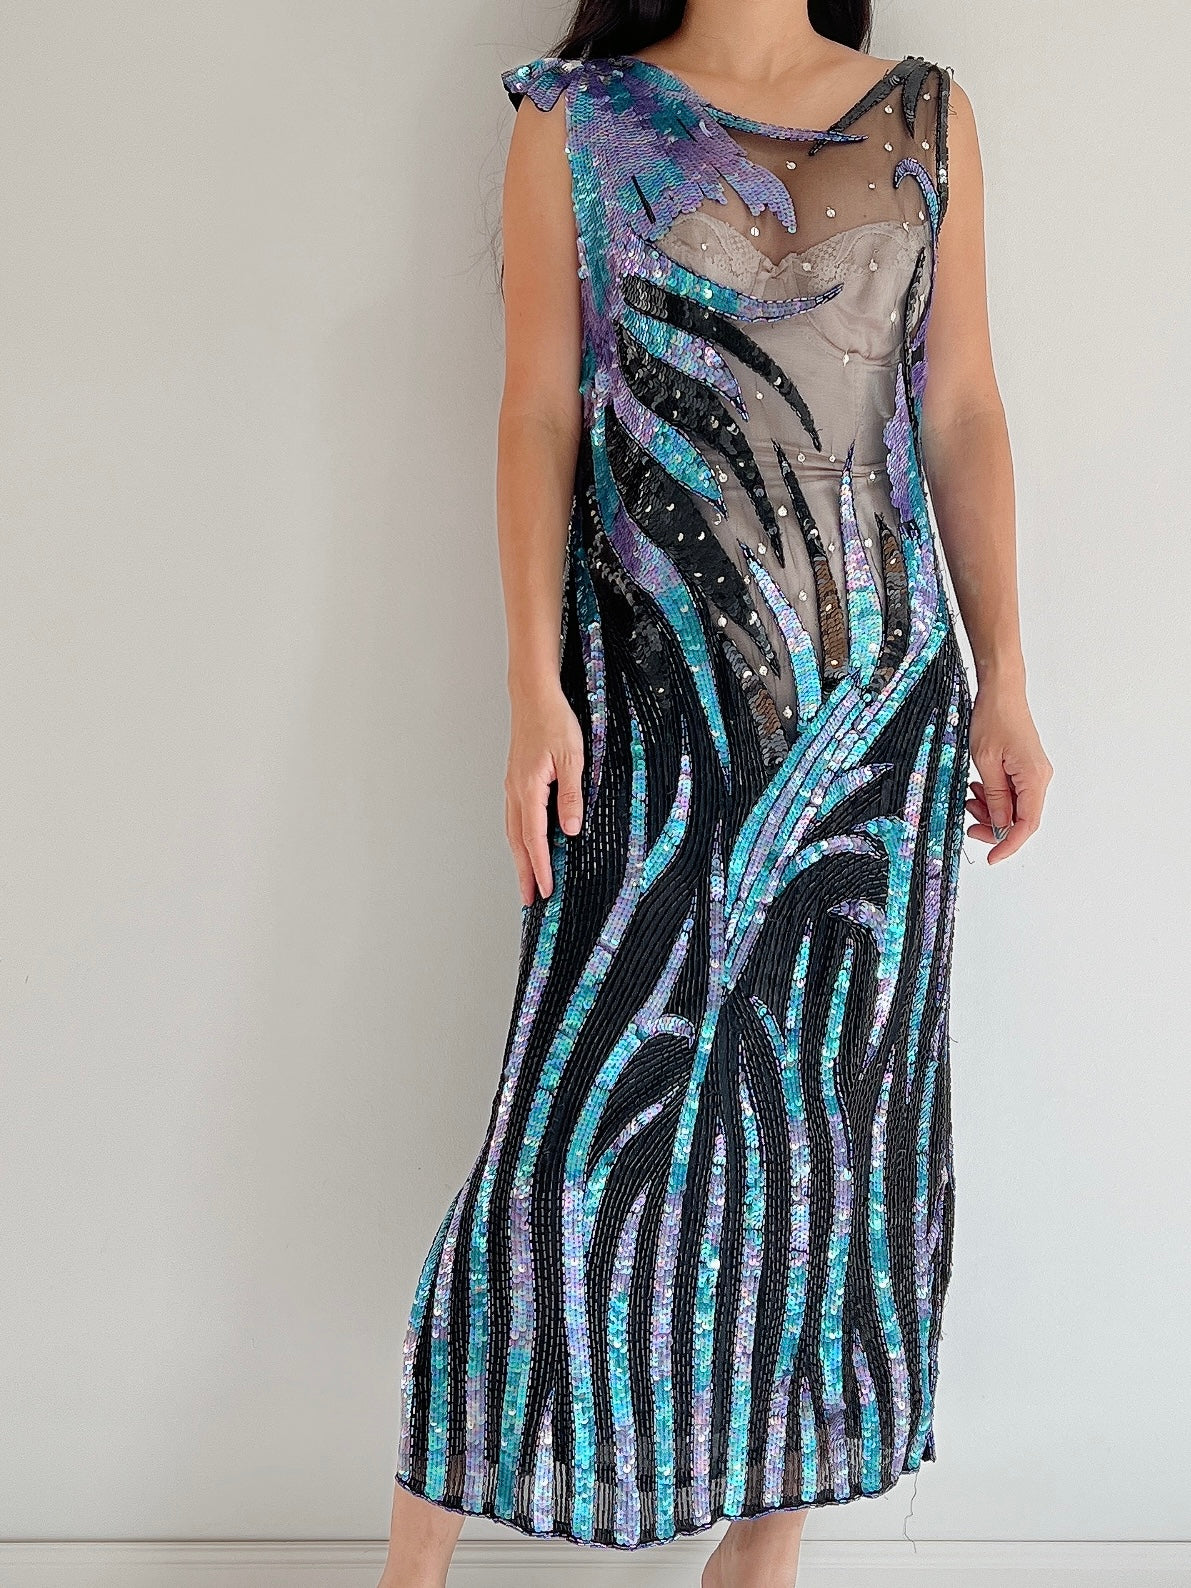 1980s Illusion Abstract Beaded Dress - S/M